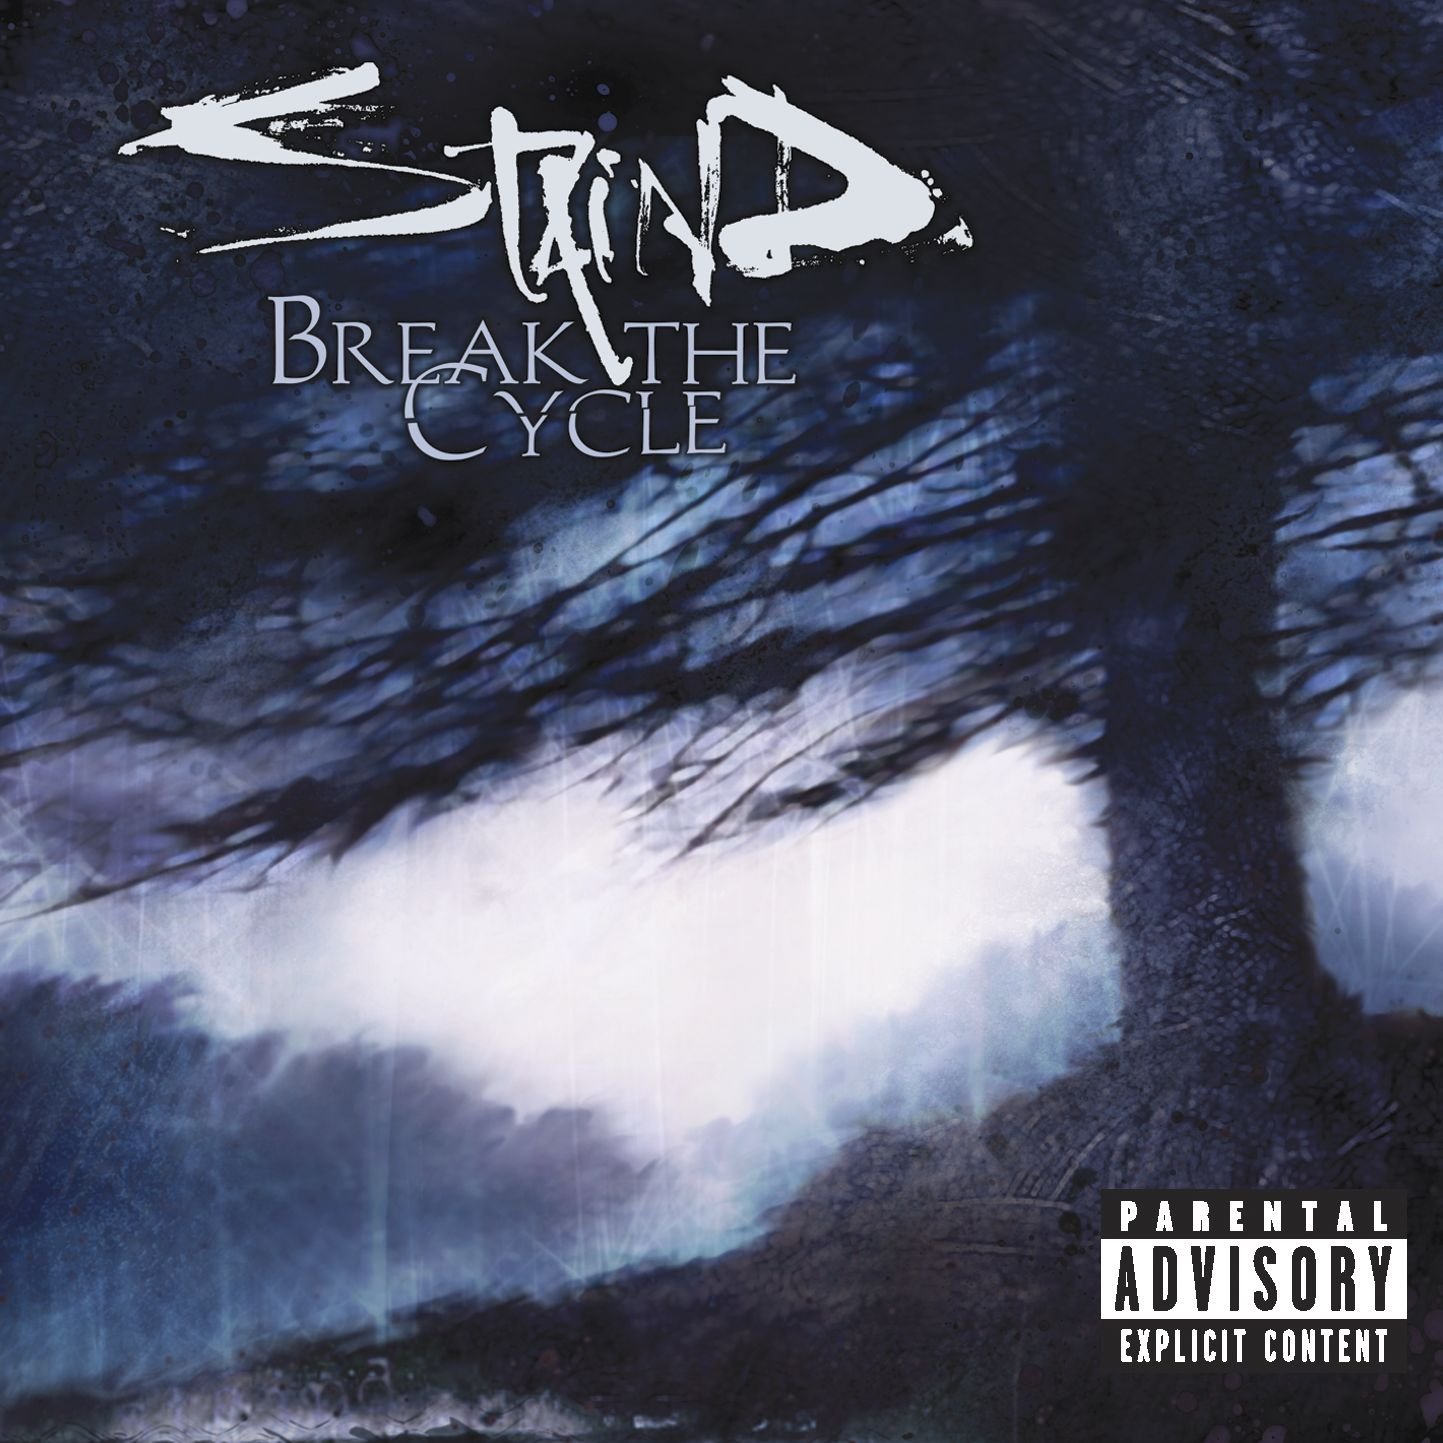 50 Years, 50 Albums 2001: Staind ‘Break the Cycle’